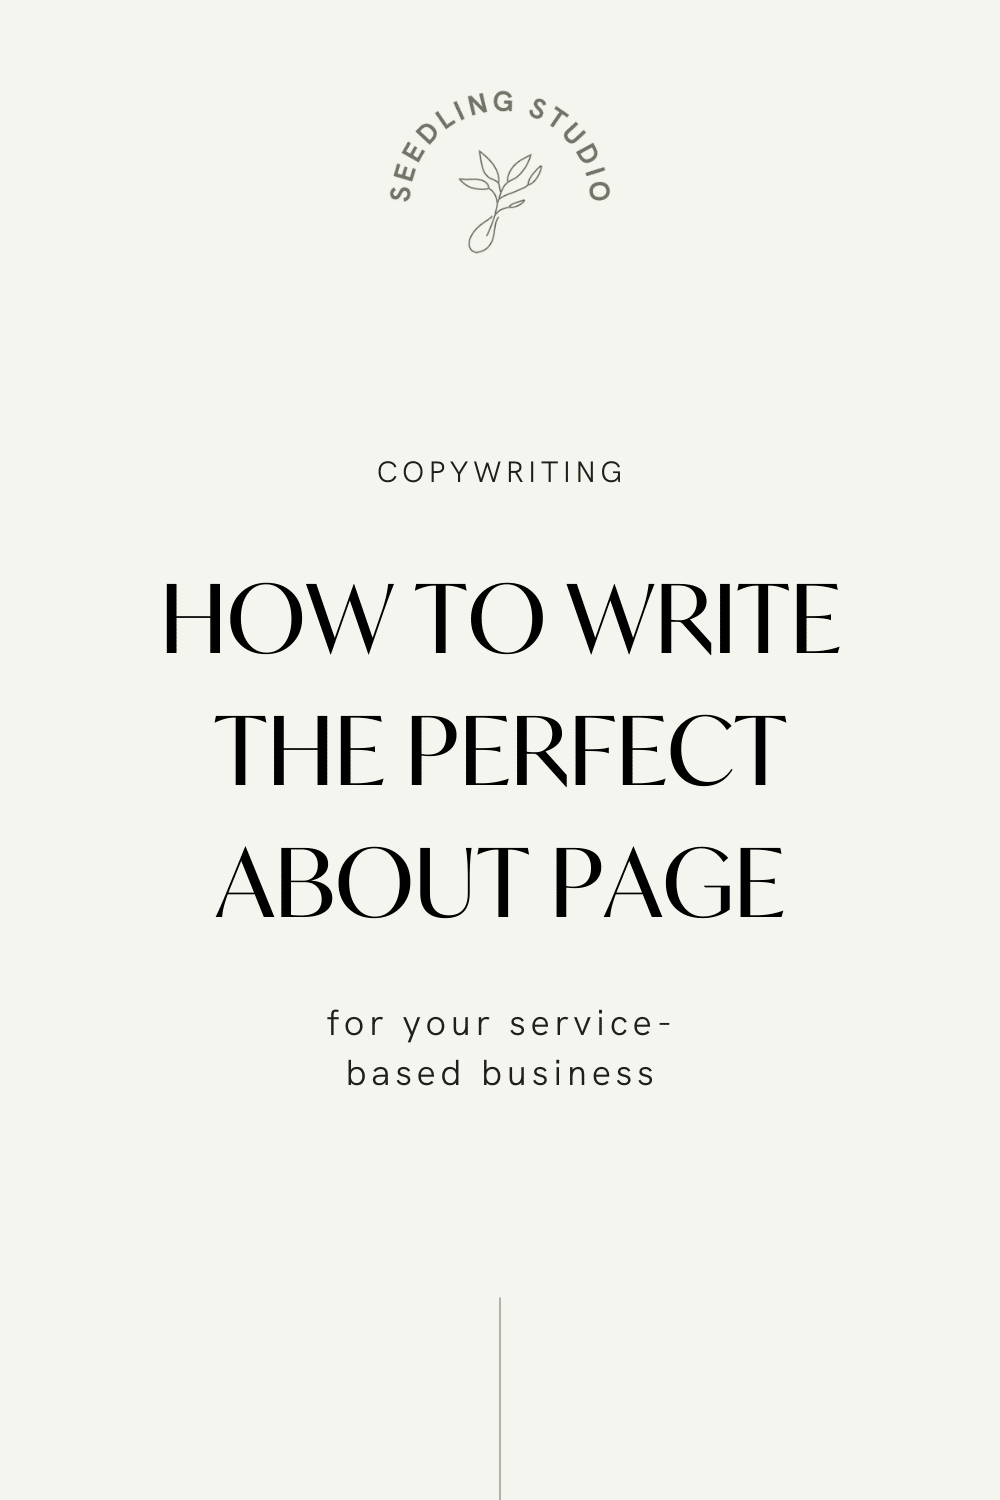 How to Write an About Page for Your Service-Based Business